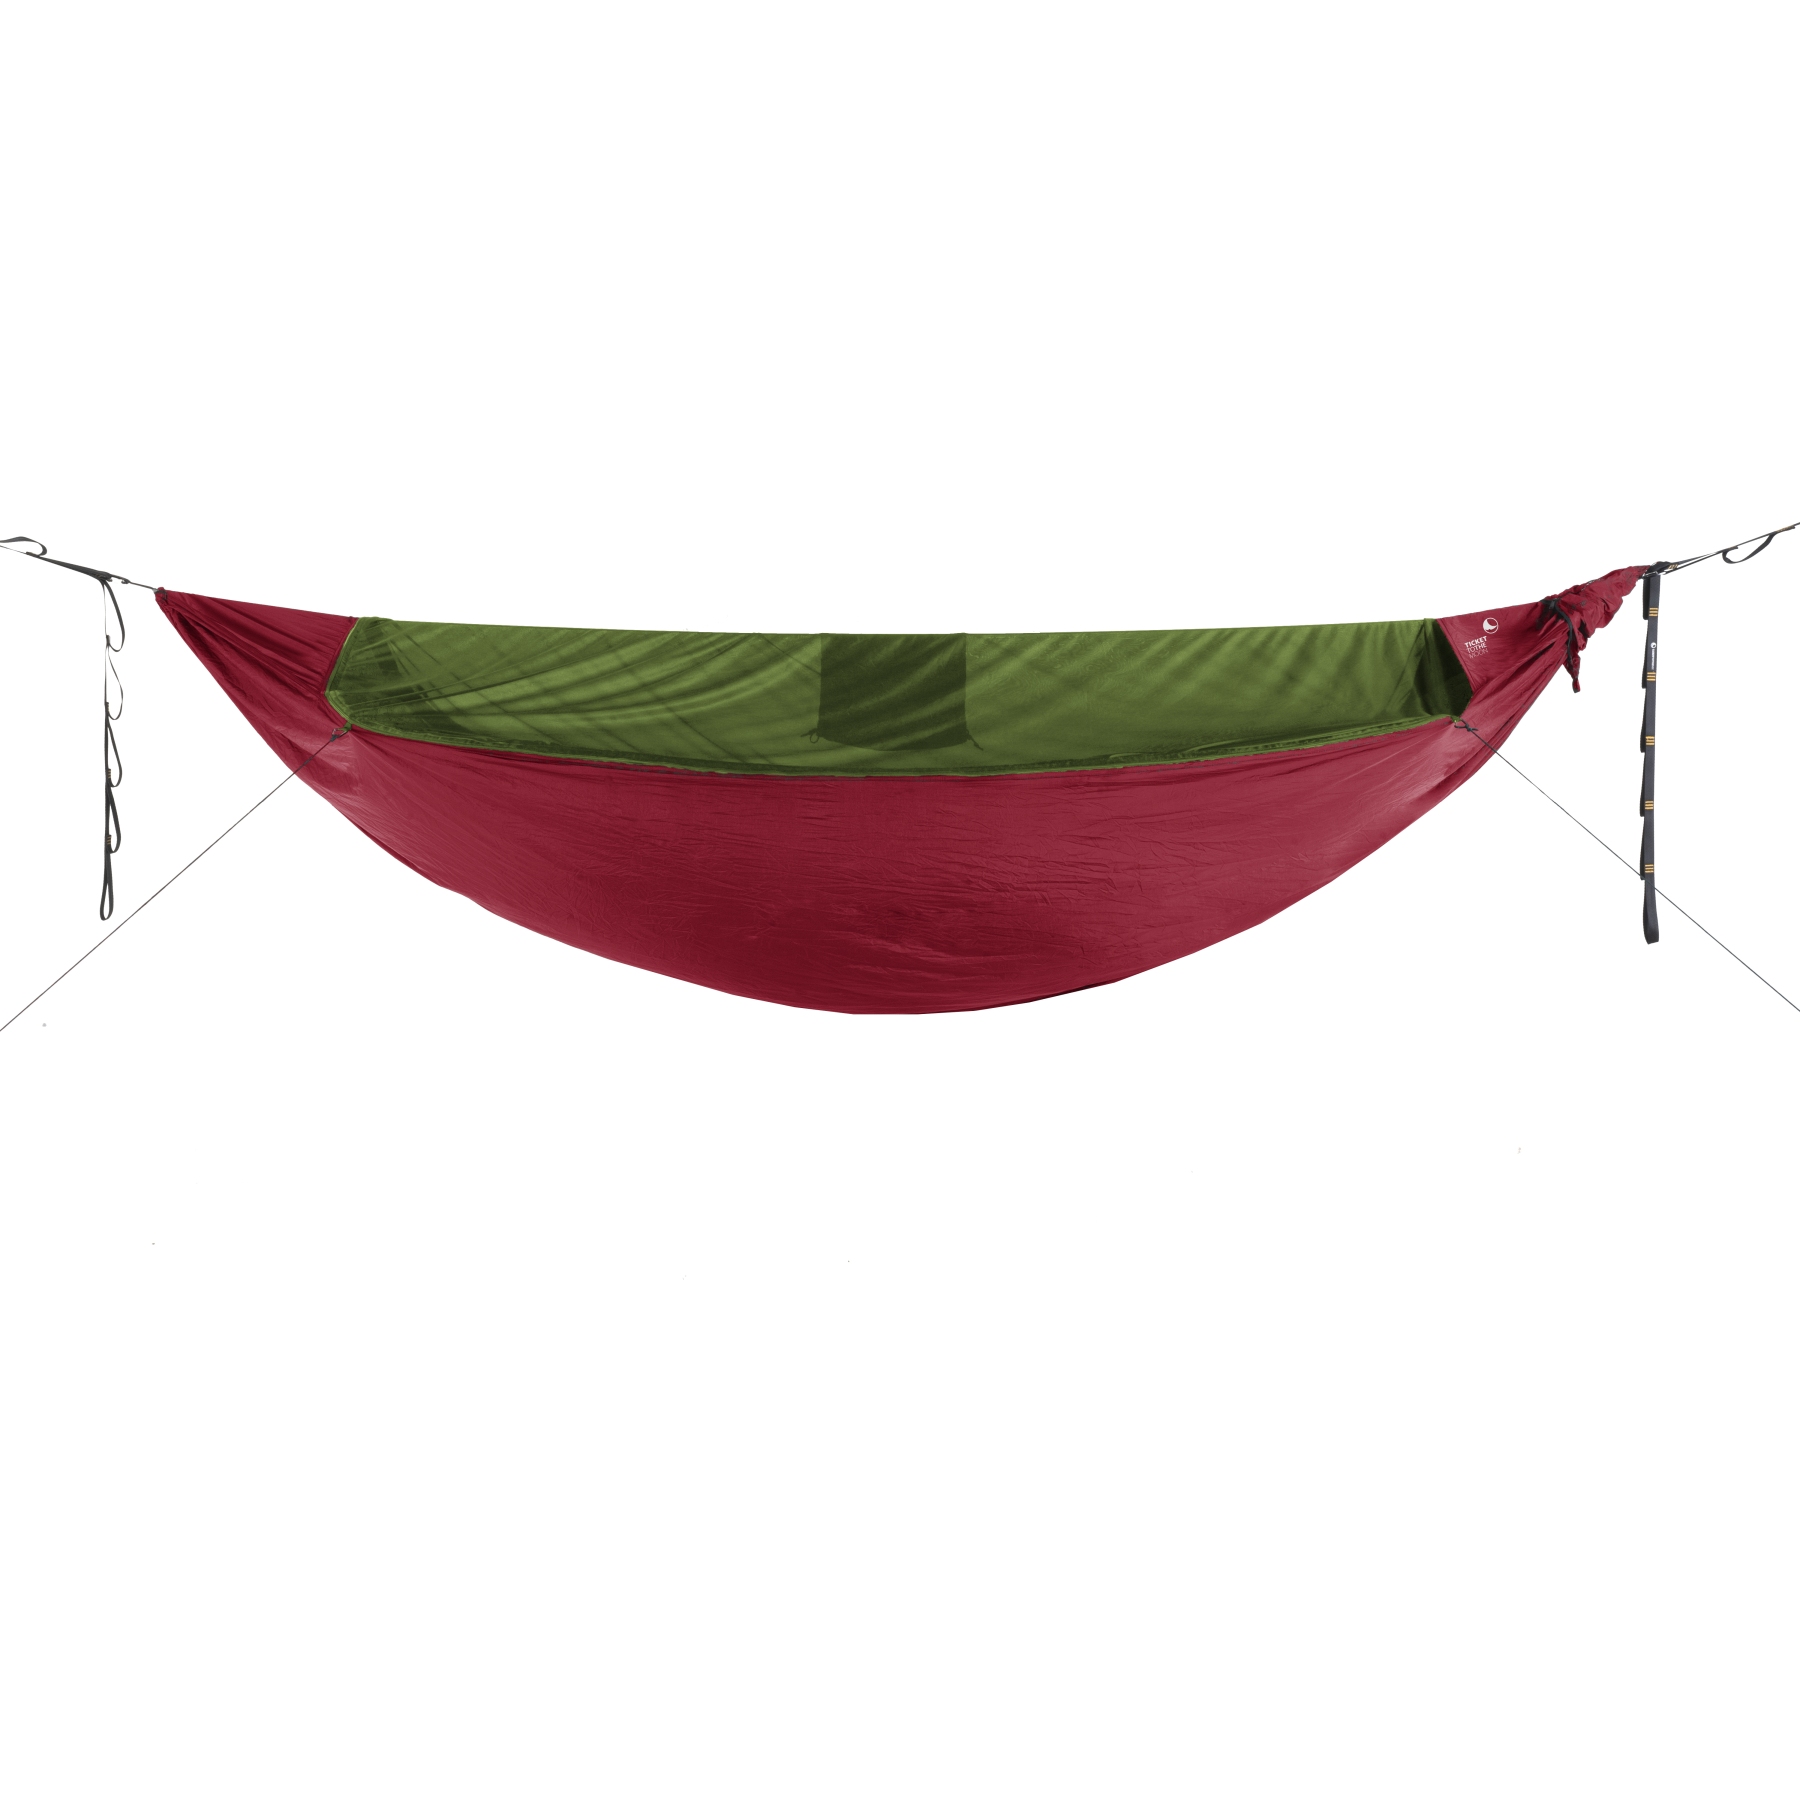 Picture of Ticket To The Moon Hammock - Original Pro - with Bug Protection Net &amp; Ridgeline - Burgundy